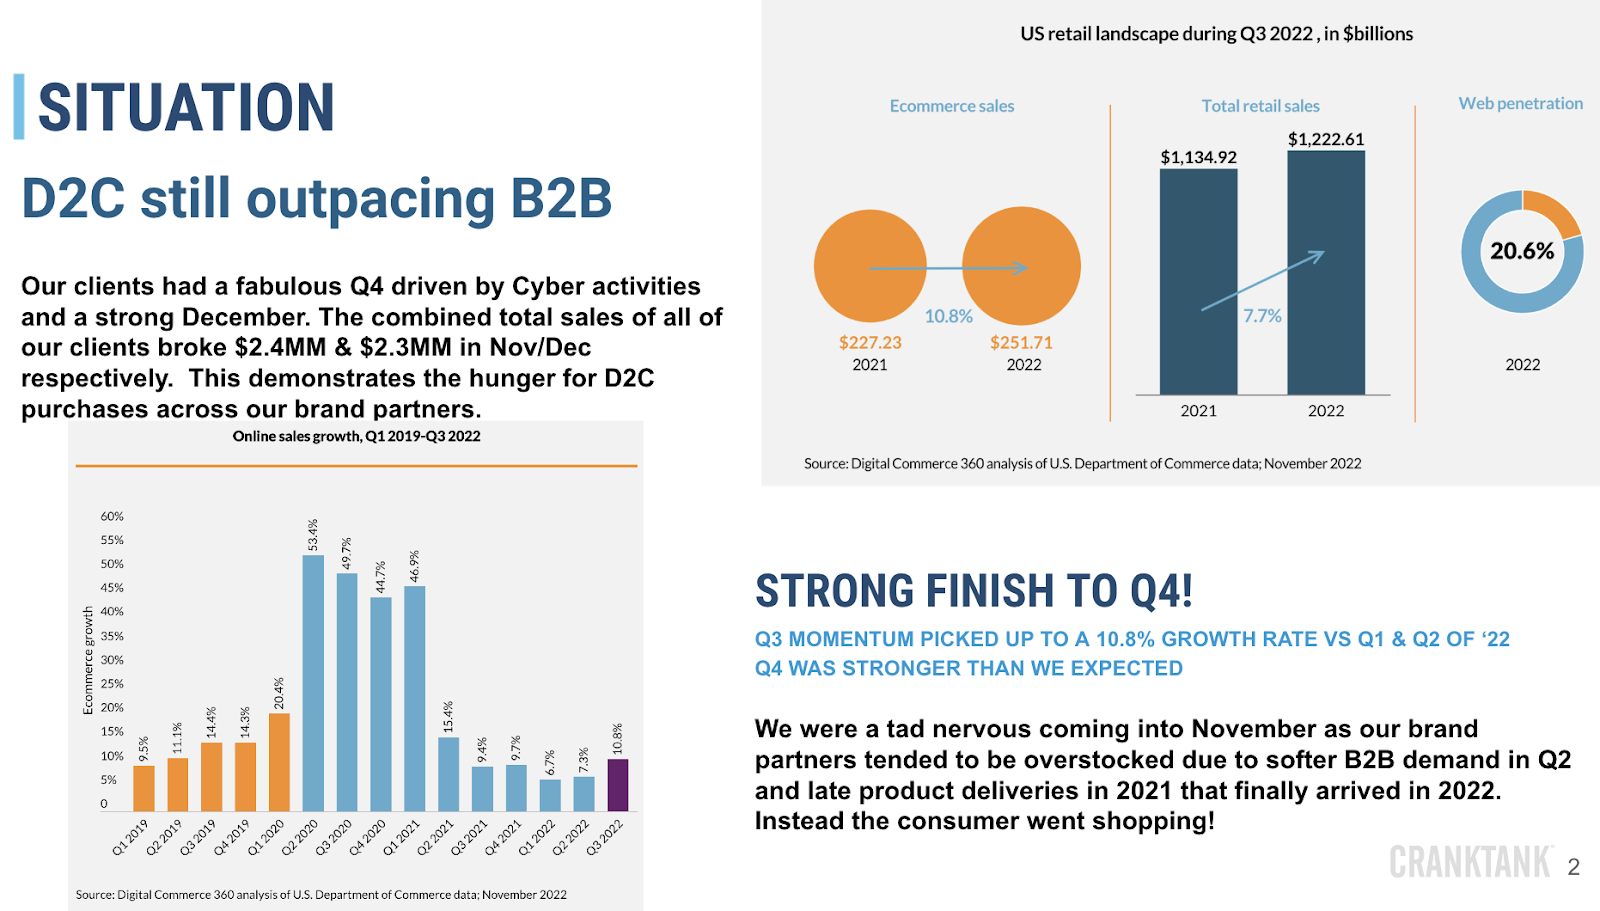 D2C sales still outpacing B2B sales posting strong Q4 finish